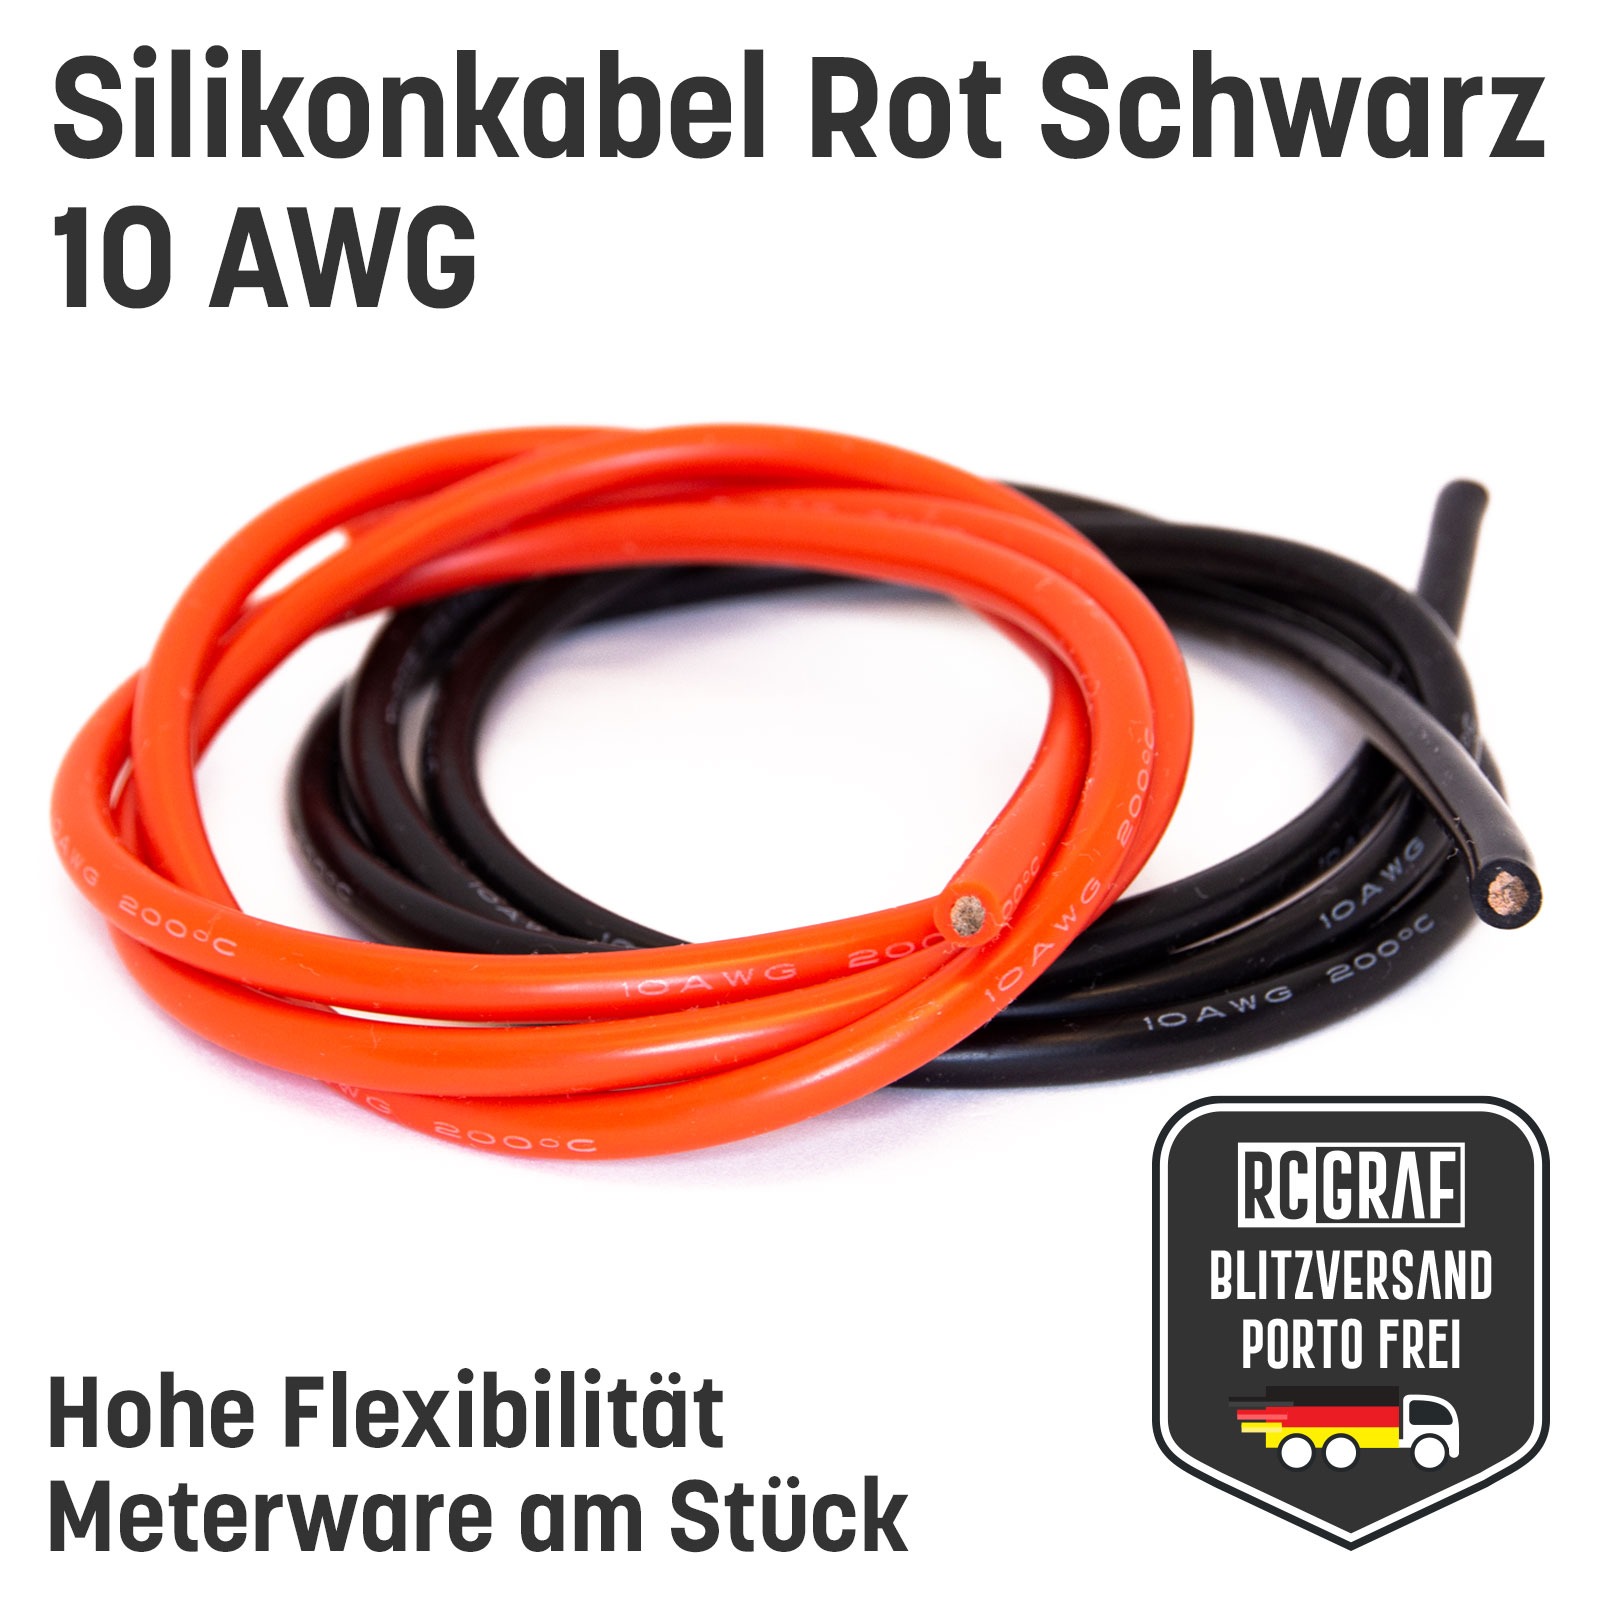 Silicone Cable 10 AWG High Flex Red Black Copper RC Cable